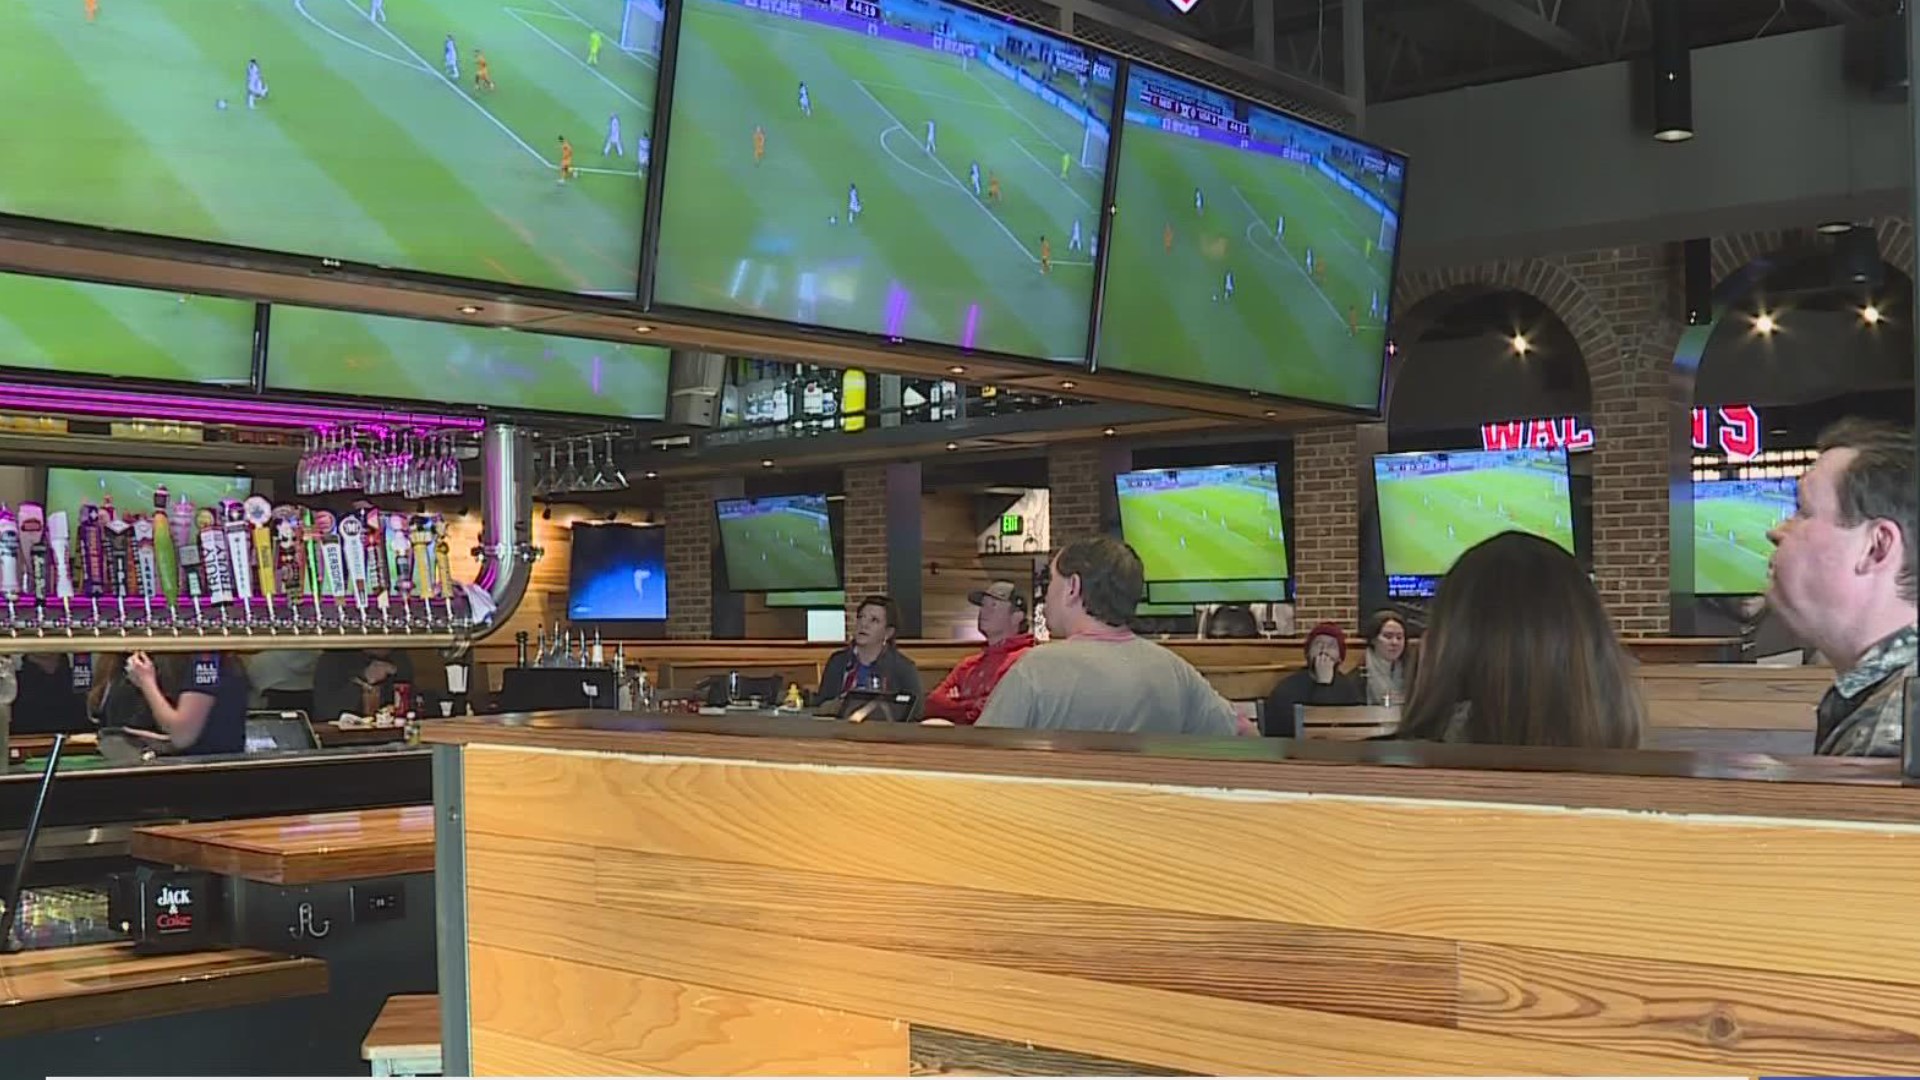 Arkansans held watch parties to cheer Team USA to victory as they took on the Netherlands.